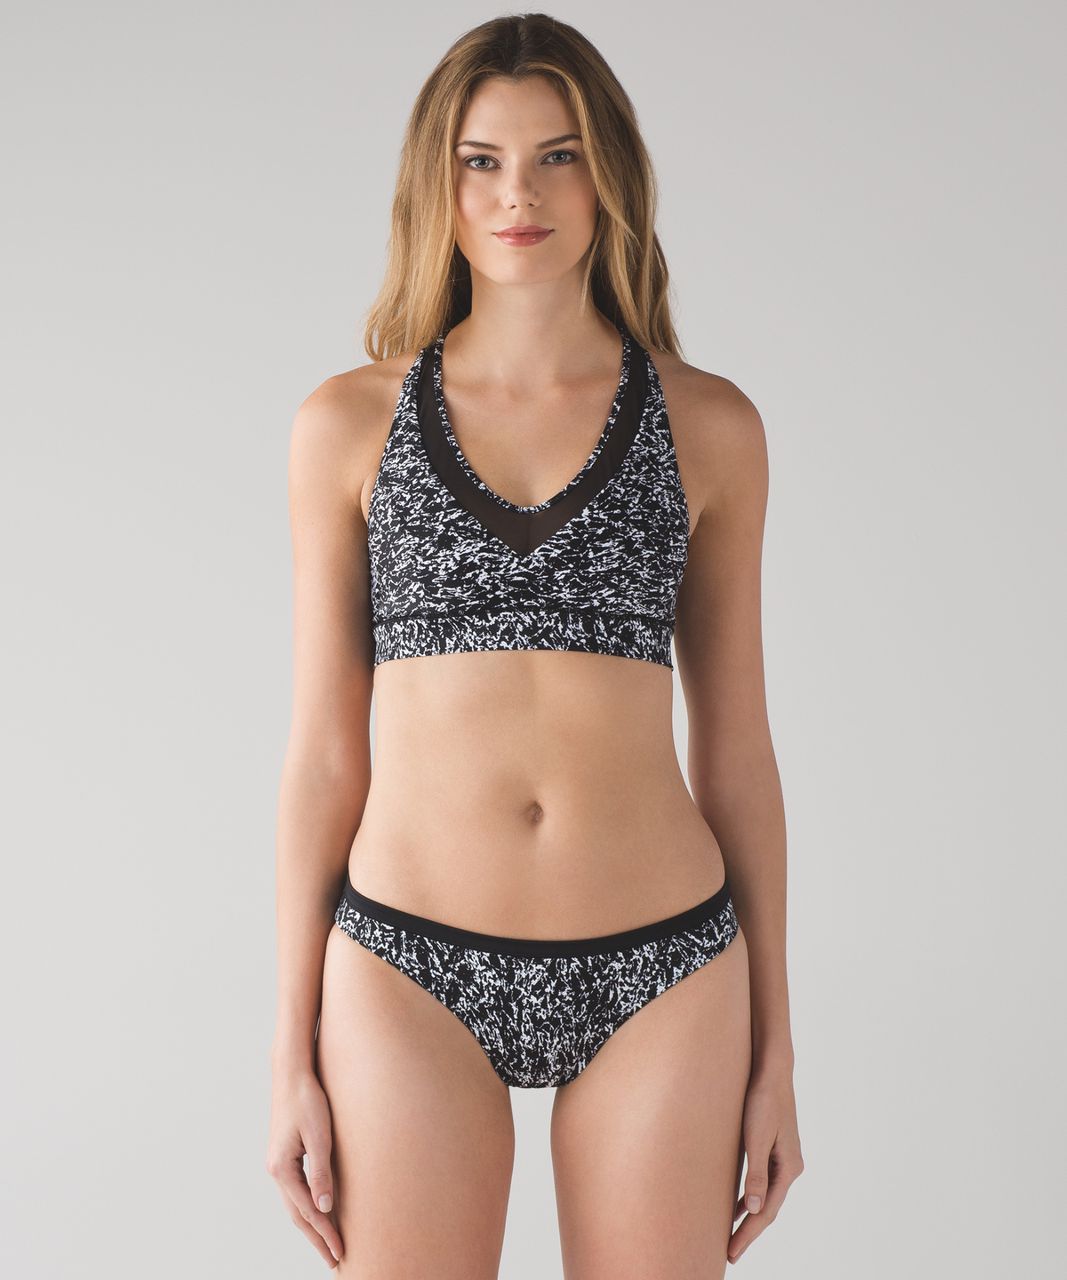 Lululemon Race With Me Top - Iced Wave White Black / Black